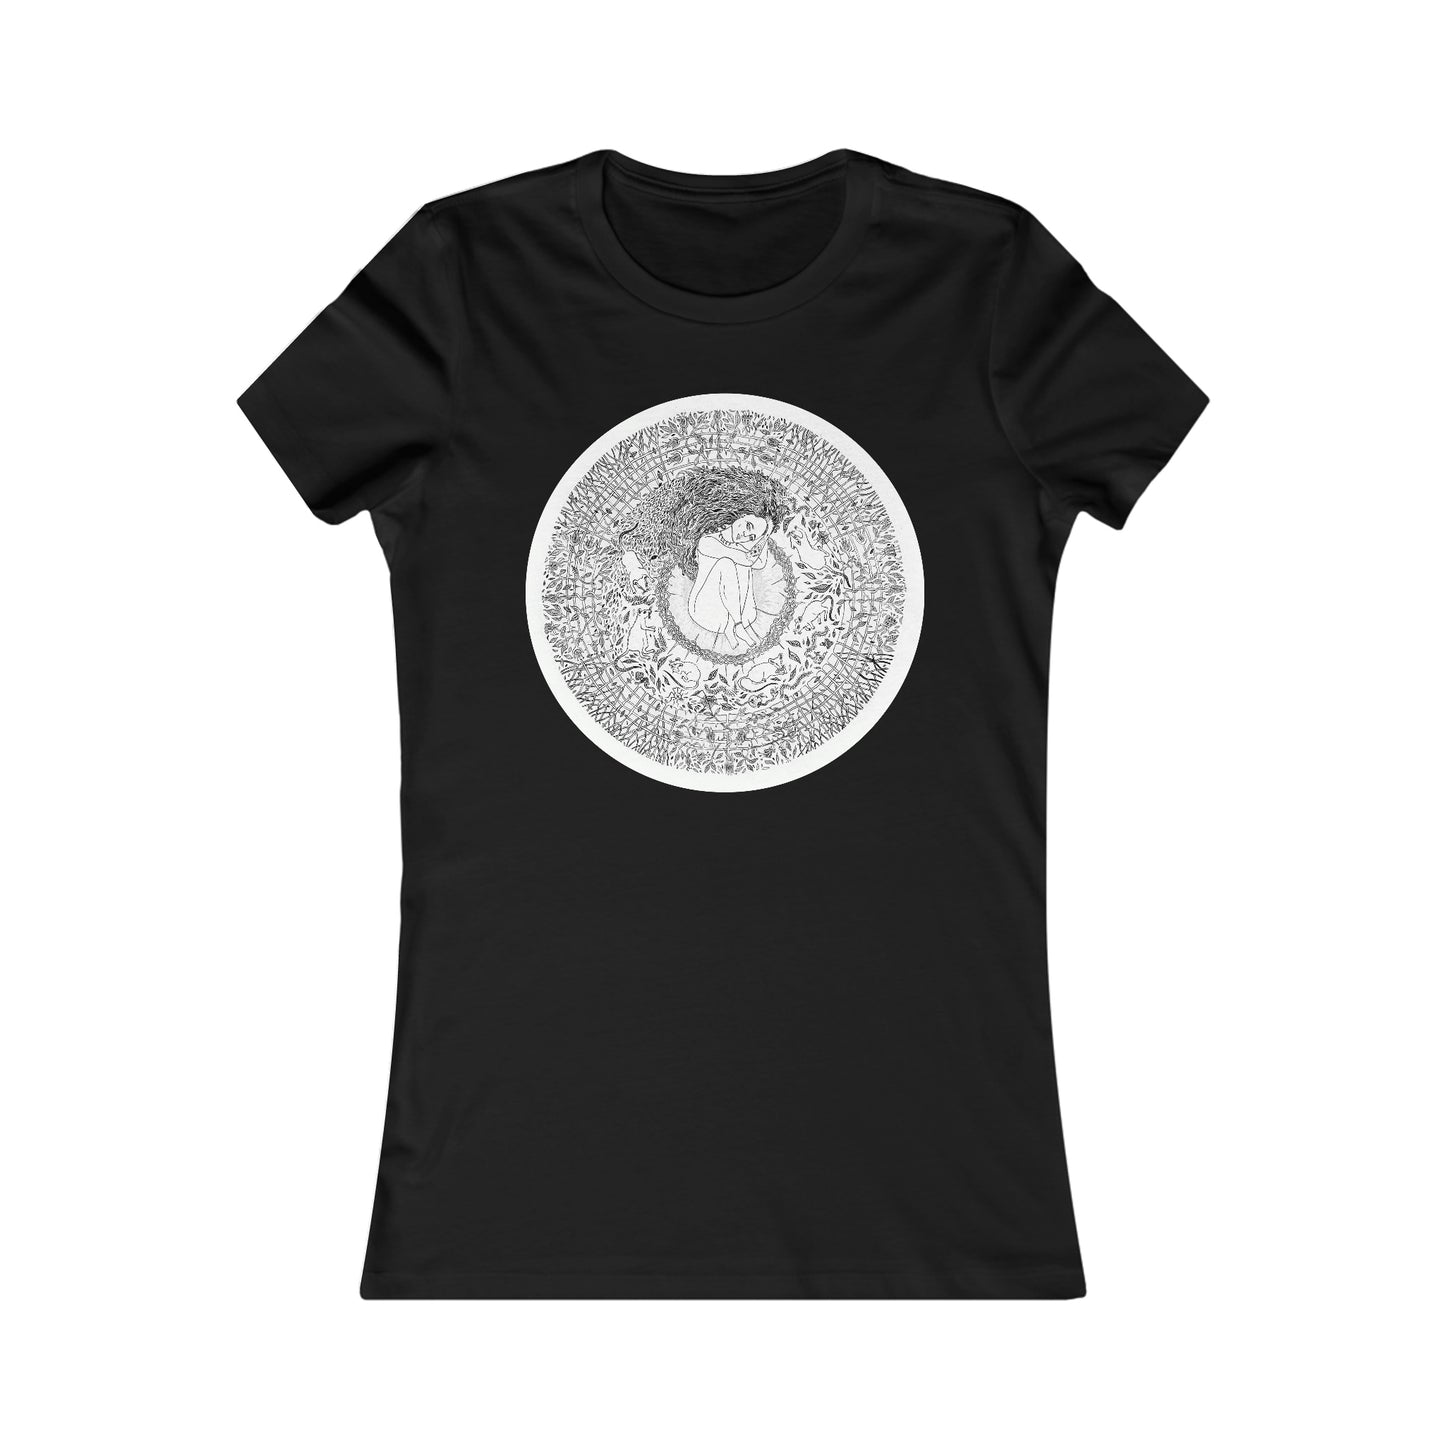 Chinese Zodiac Sign T Shirt (Rat) Limited Edition